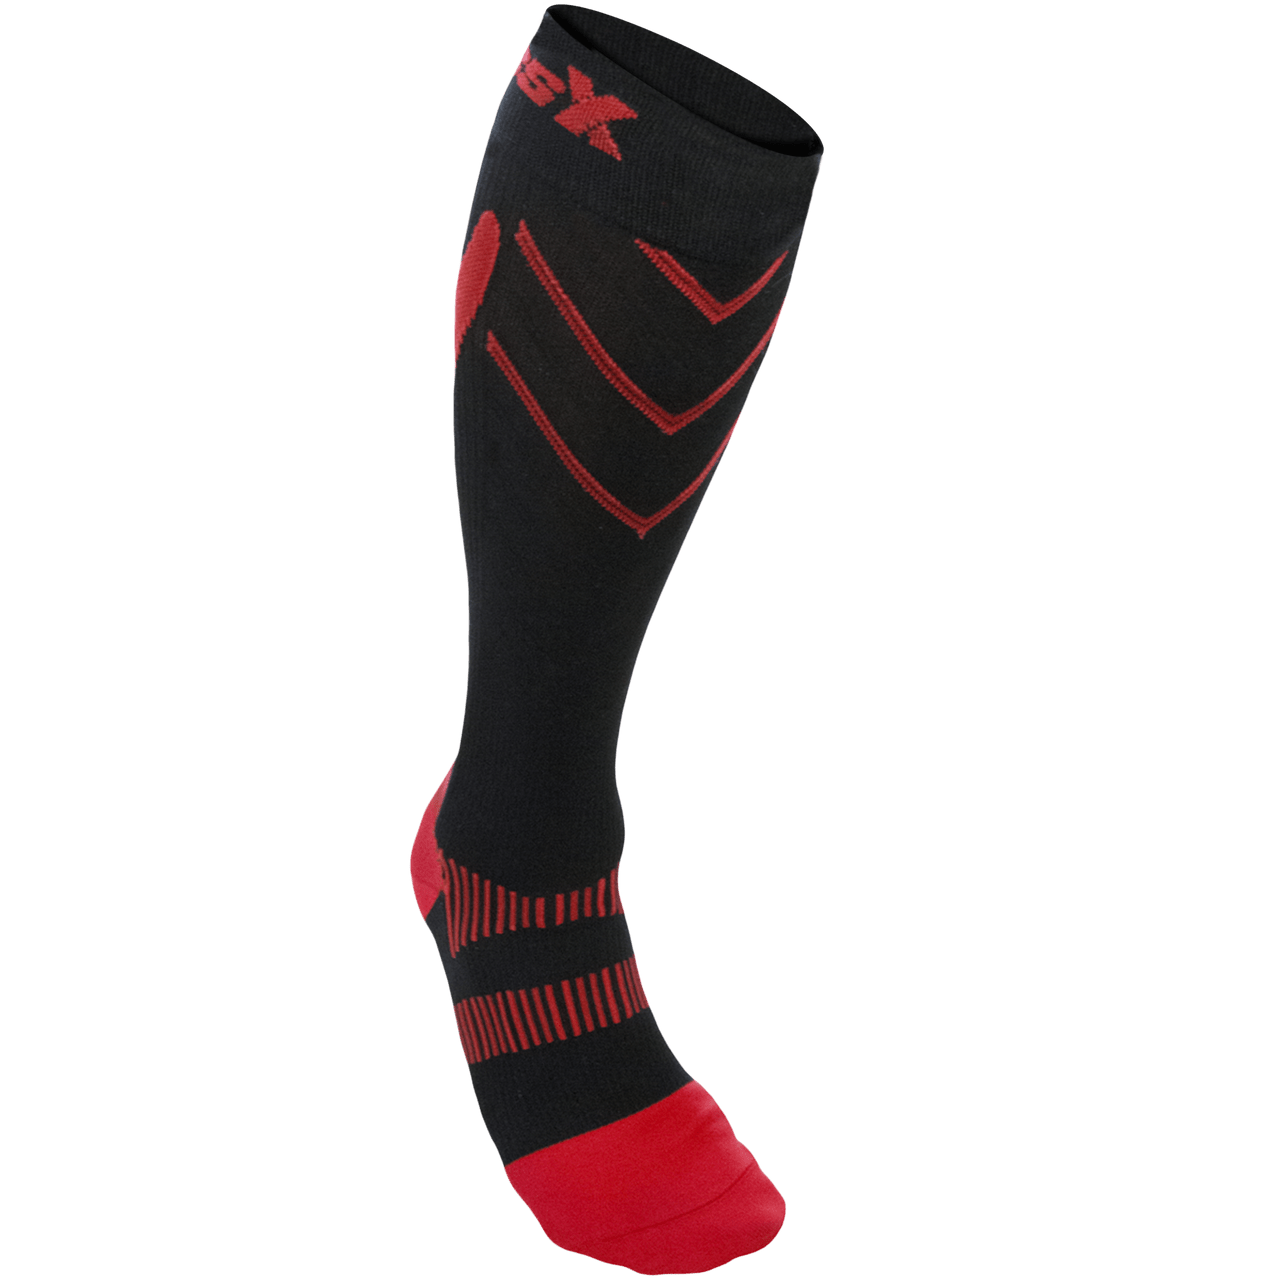 Compression Socks and Other Wear Are Key to Sports and Surgical Recovery